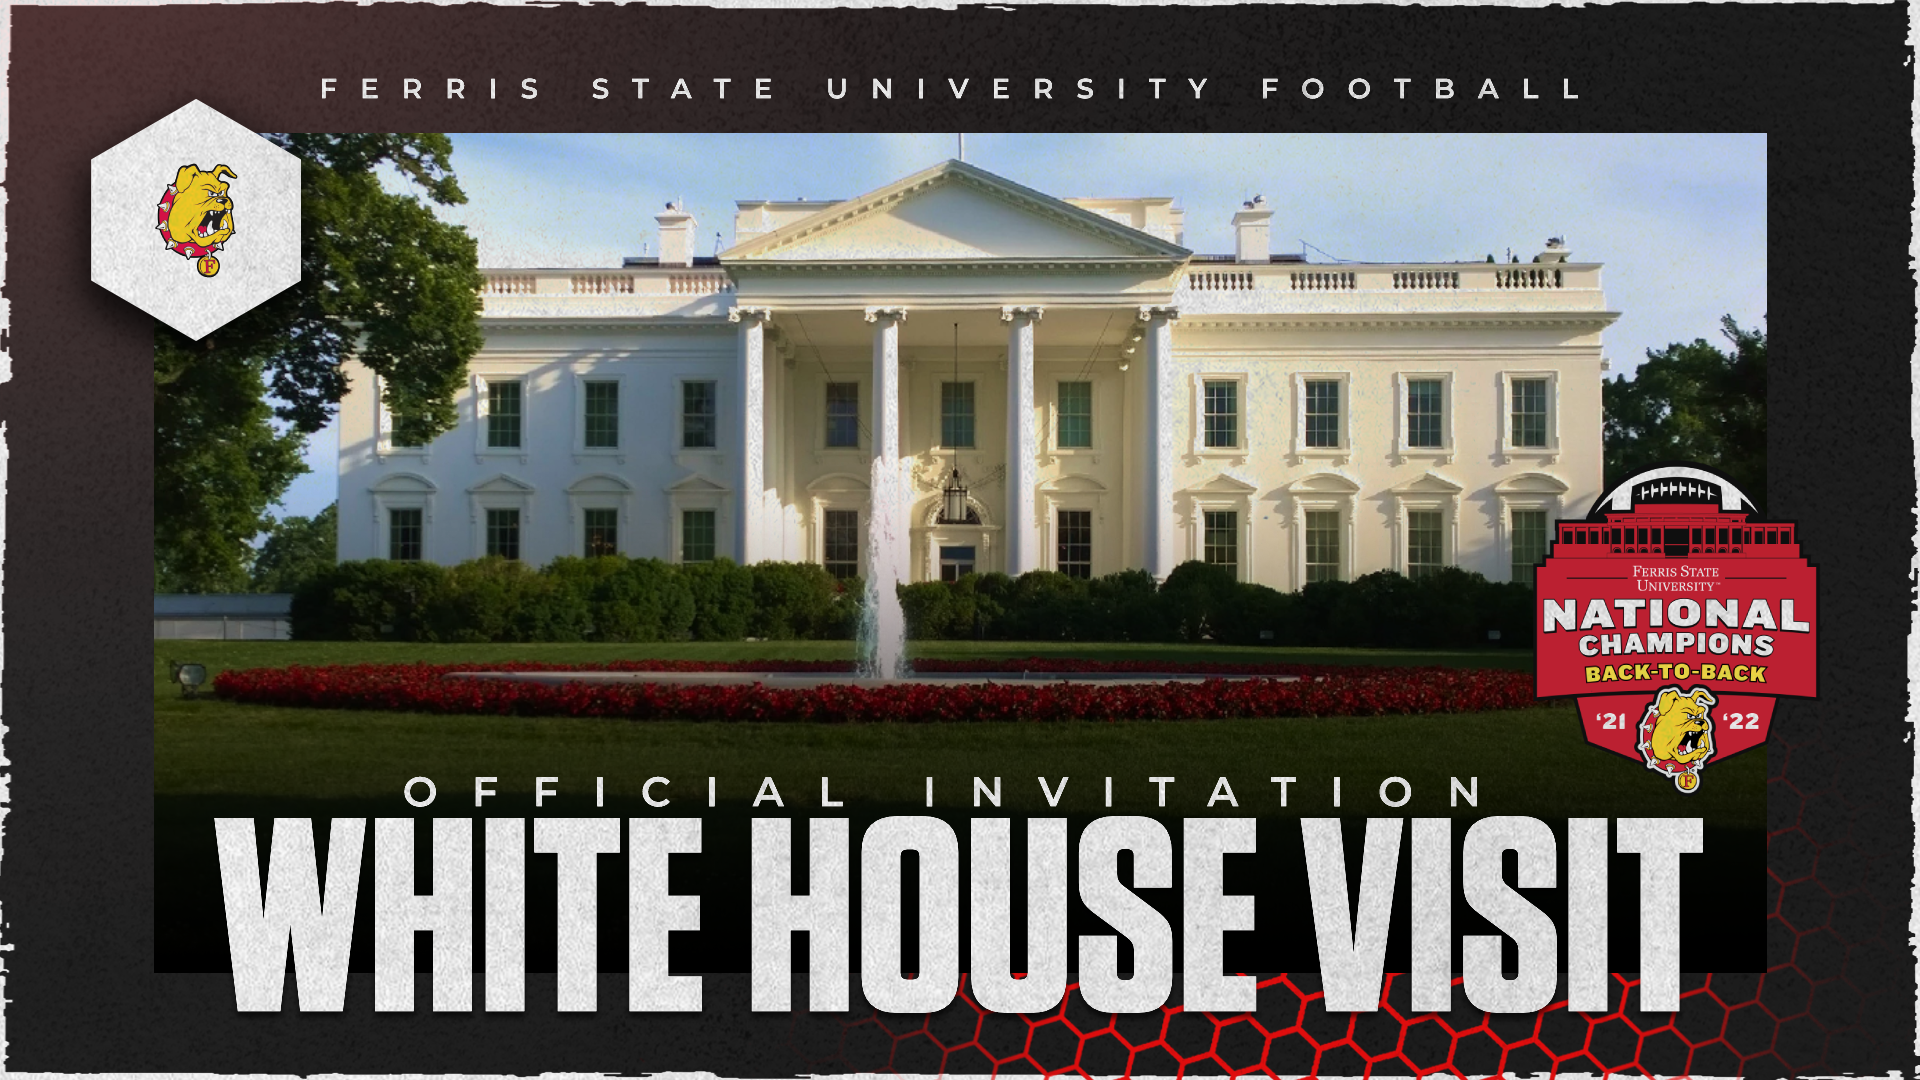 BACK-TO-BACK NATIONAL CHAMPION FERRIS STATE ACCEPTS WHITE HOUSE INVITATION!